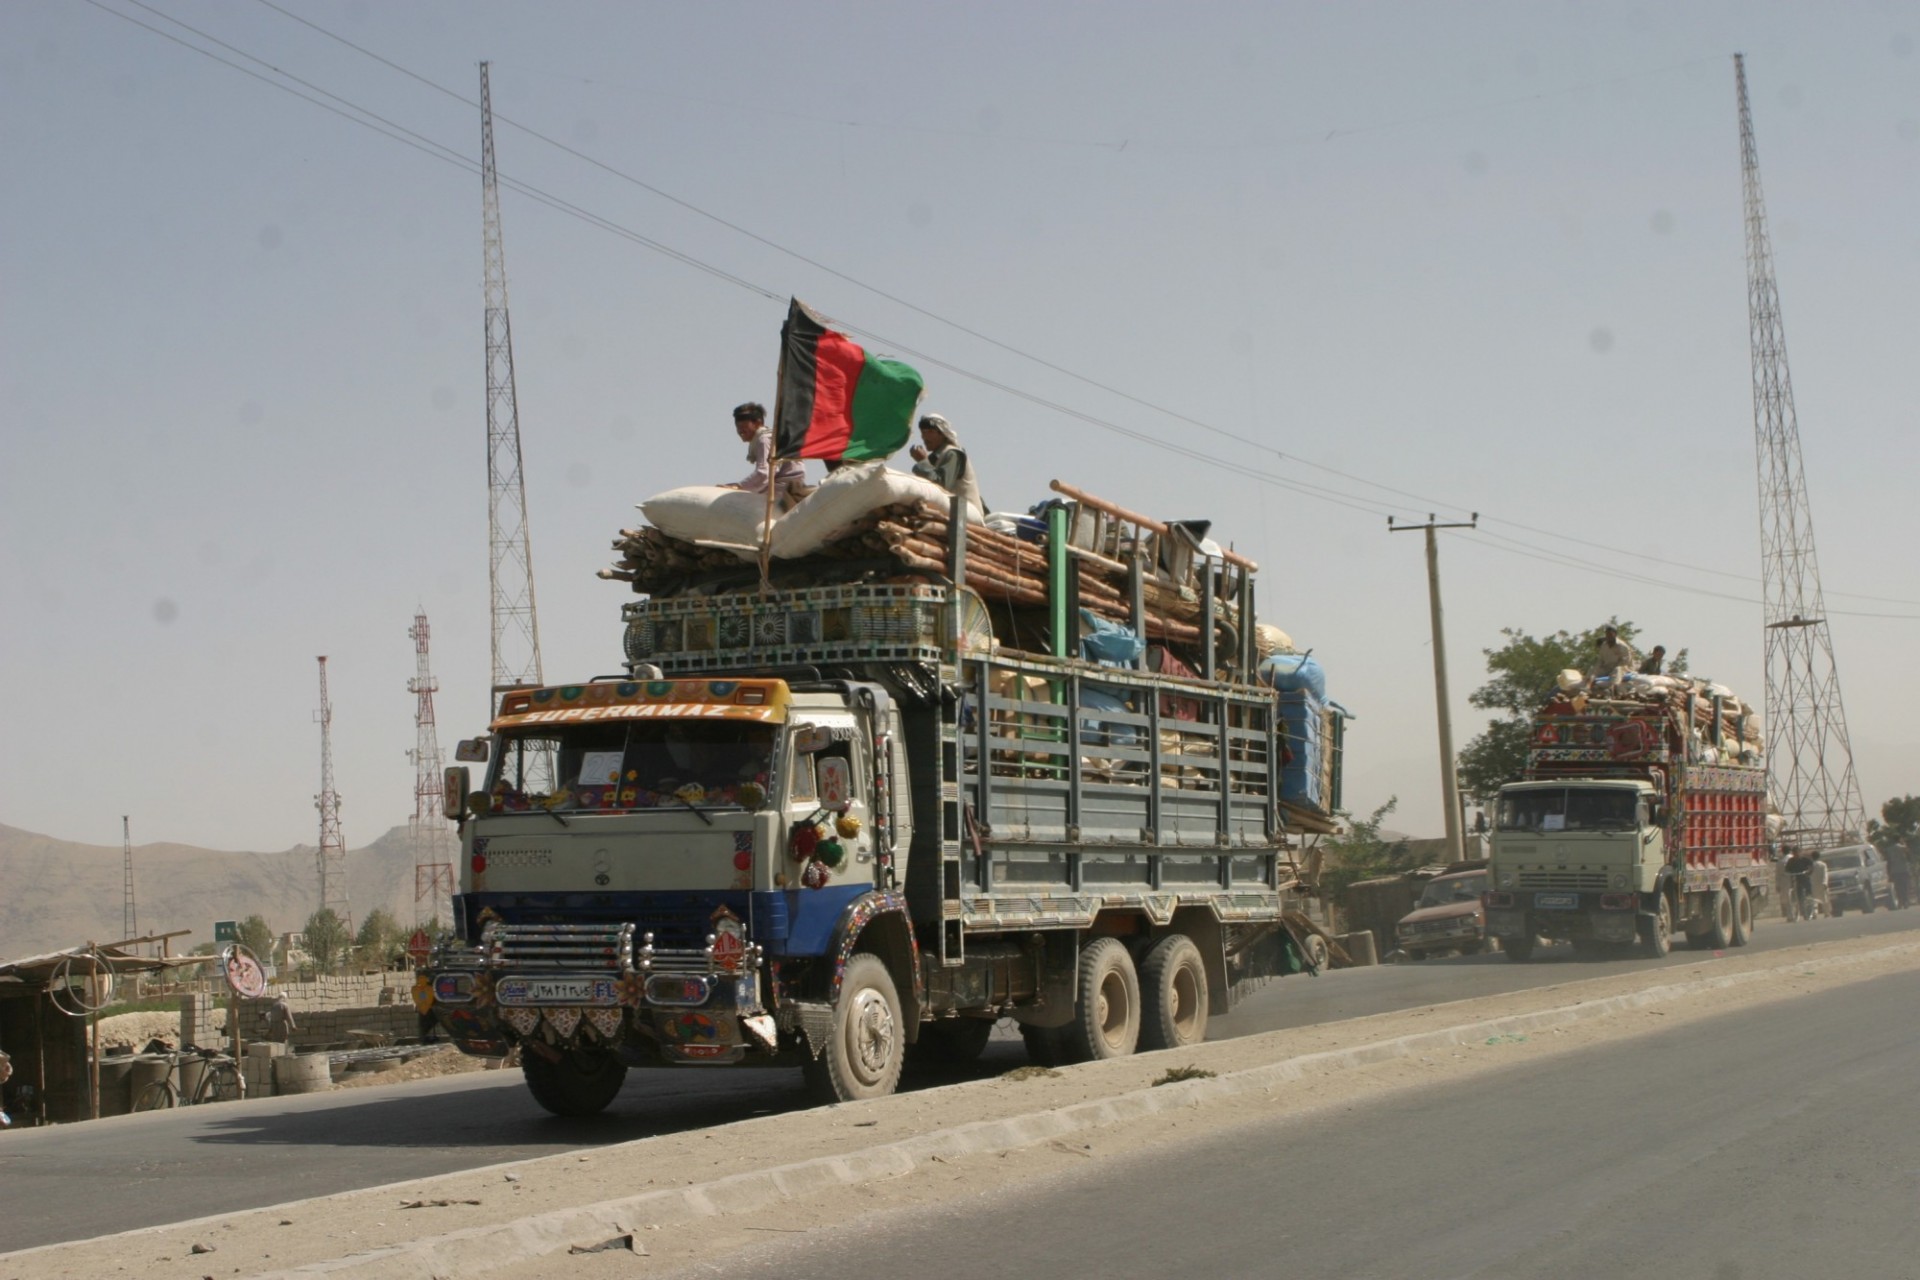 A truck loaded with Afghan refugees returning from Pakistan after years in exile pulls into the UN reception center in Kabul. Source: USAID, Wikimedia Commons, Public domain.